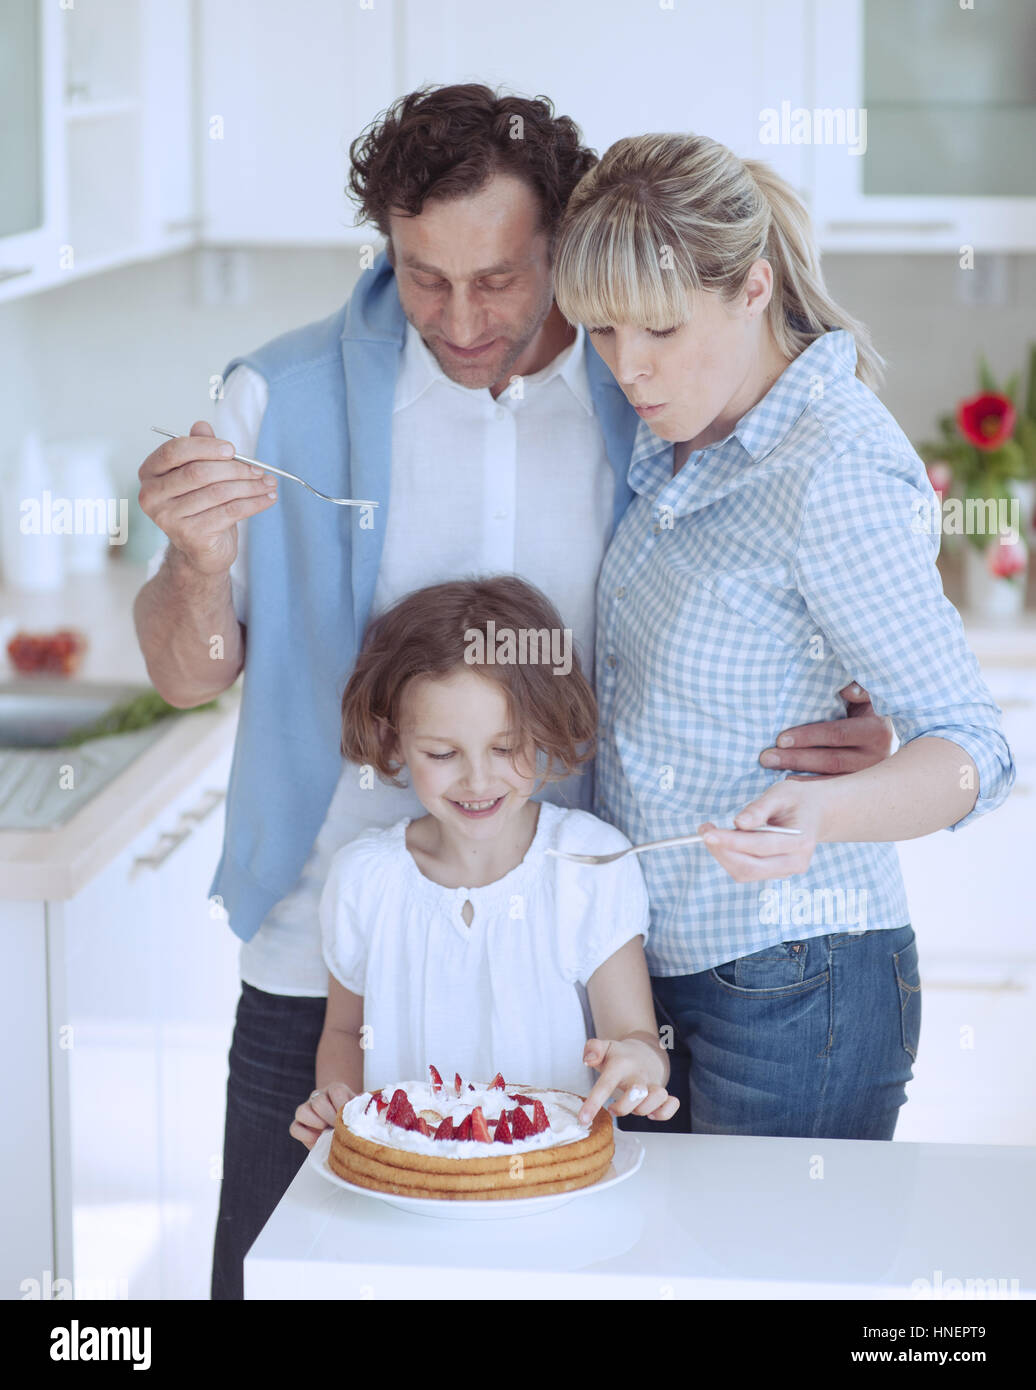 Family preparing healthy meal in kitchen Stock Photo